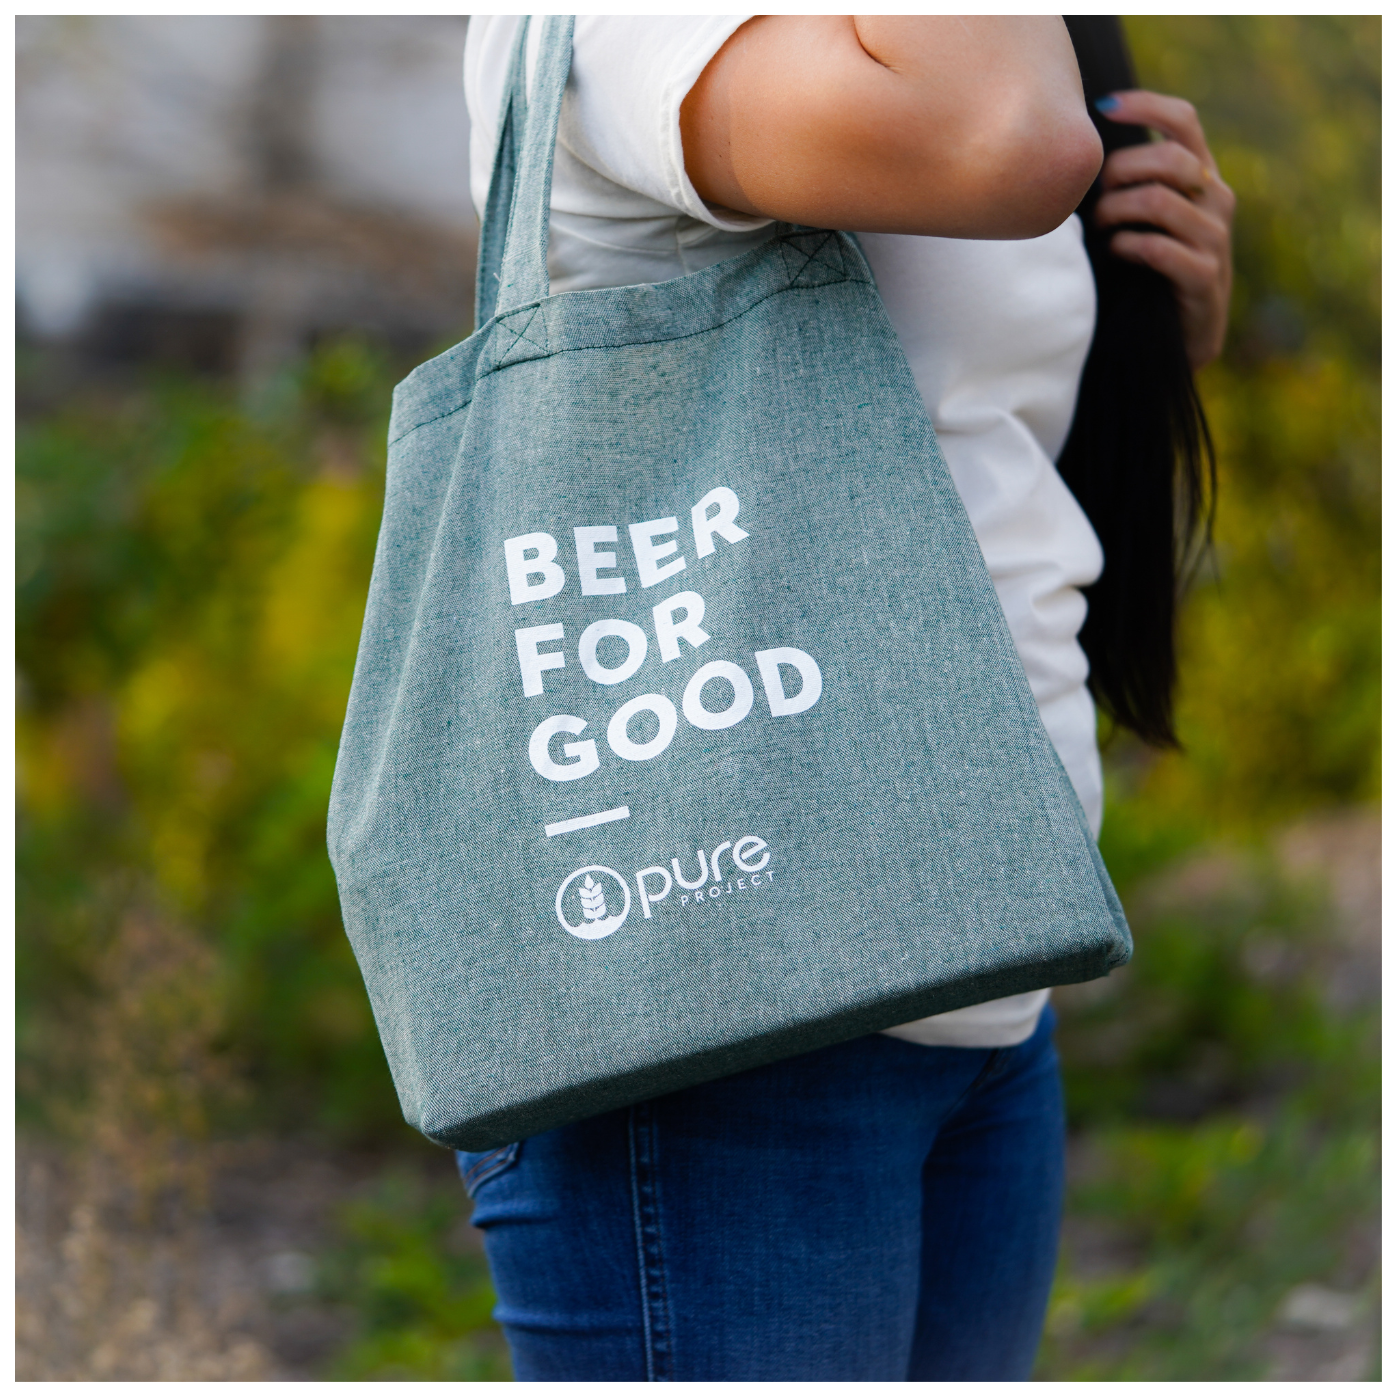 "Beer For Good" Tote Bag